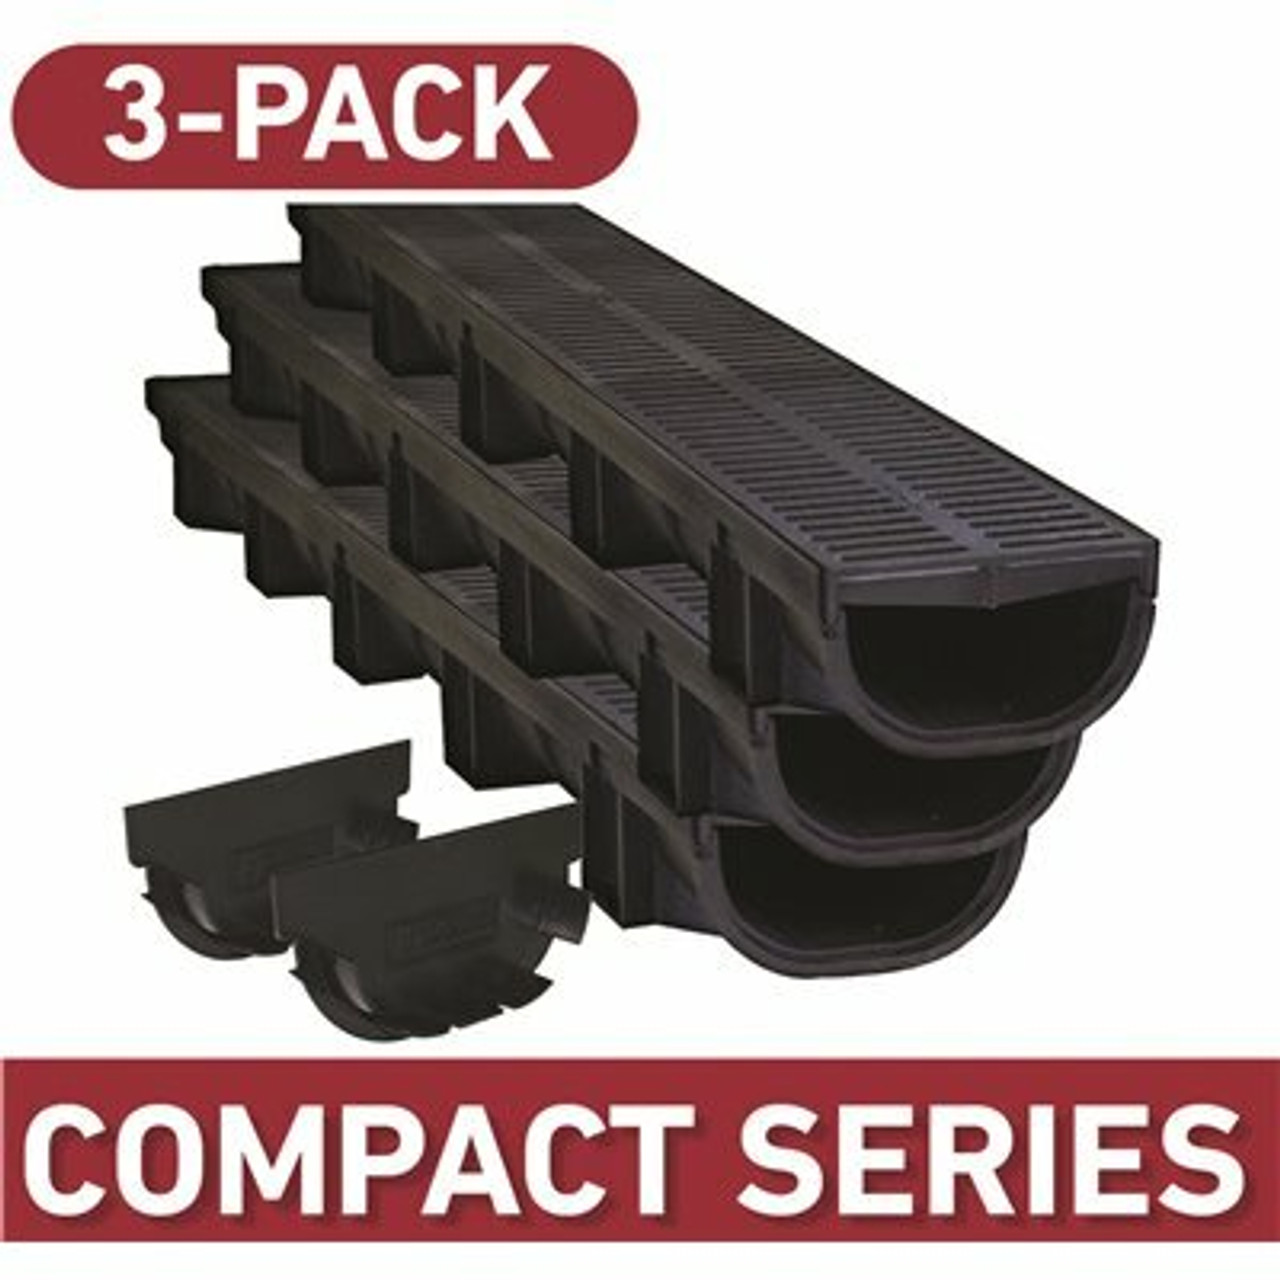 Compact Series 5.4 In. W X 3.2 In. D X 39.4 In. L Trench And Channel Drain Kit With Black Grate (3-Pack | 9.8 Ft)